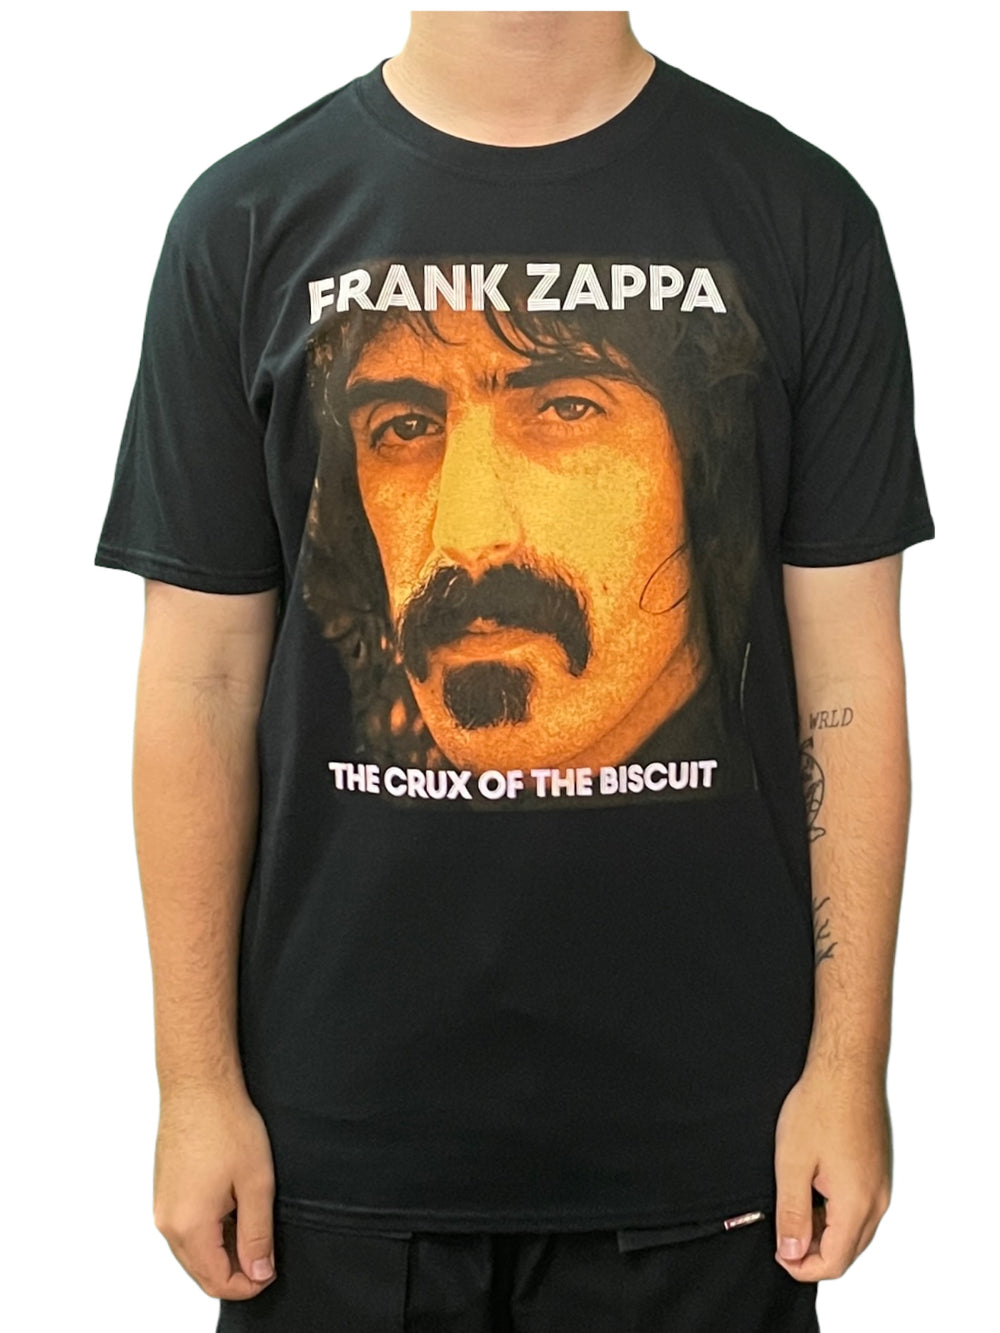 Frank Zappa CRUX Official Unisex T Shirt Brand New Various Sizes